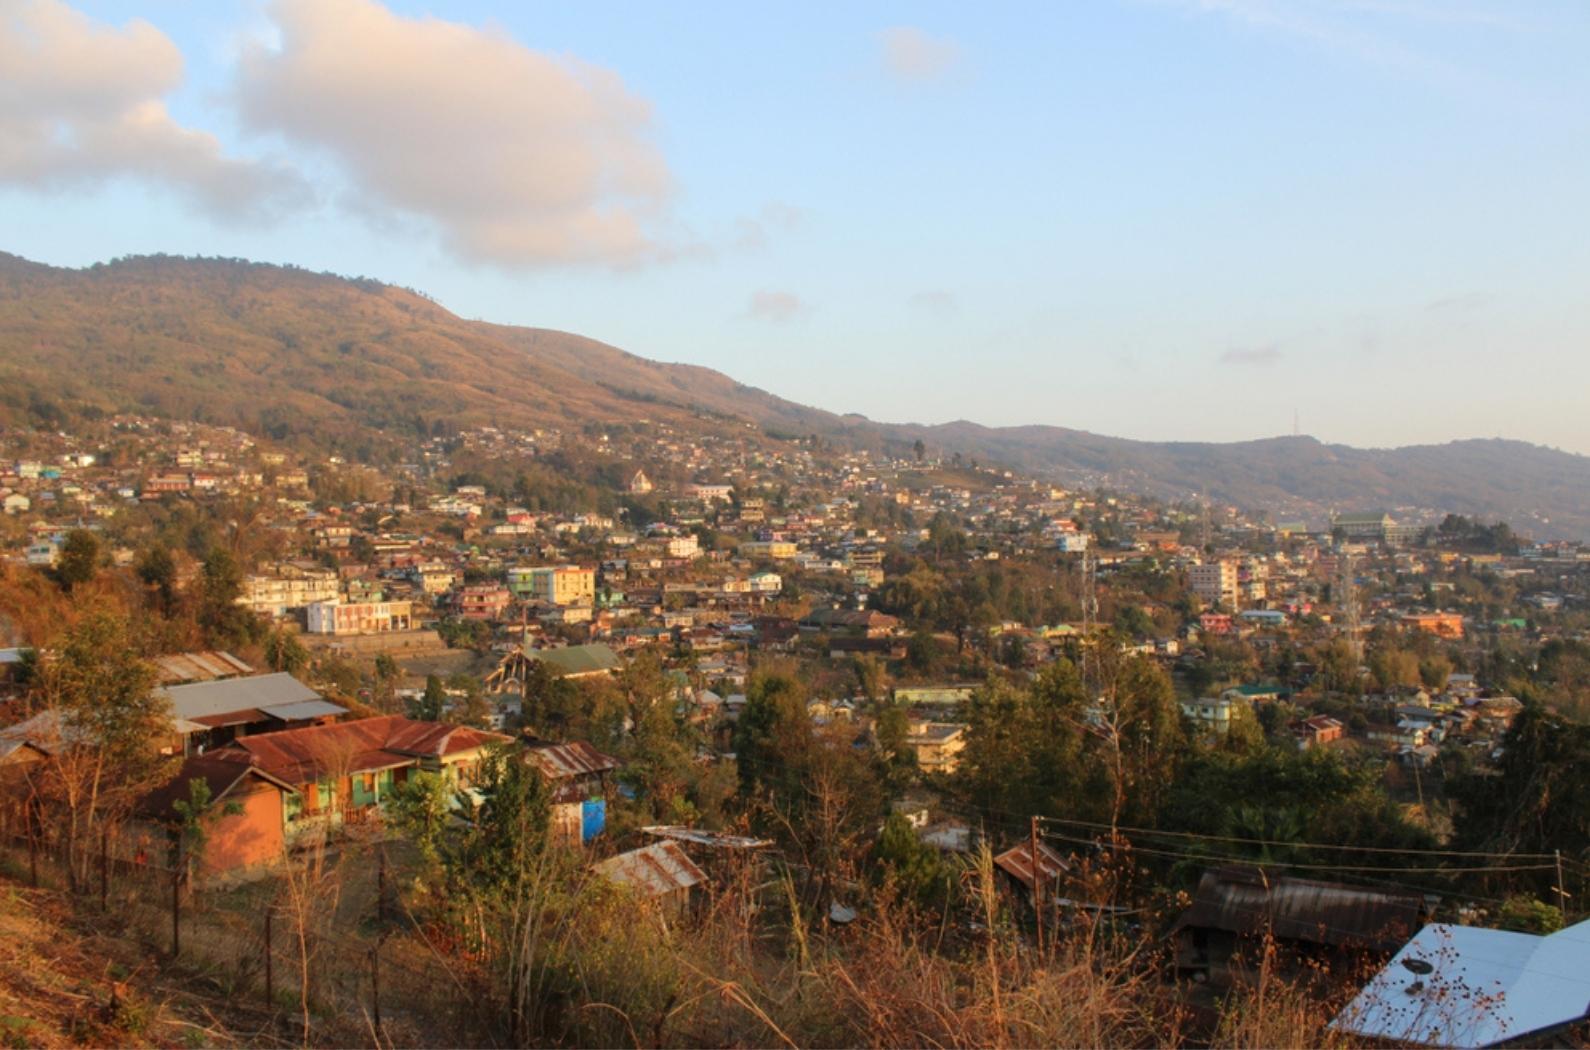 A panoramic view of the town of Wokha, Nagaland.